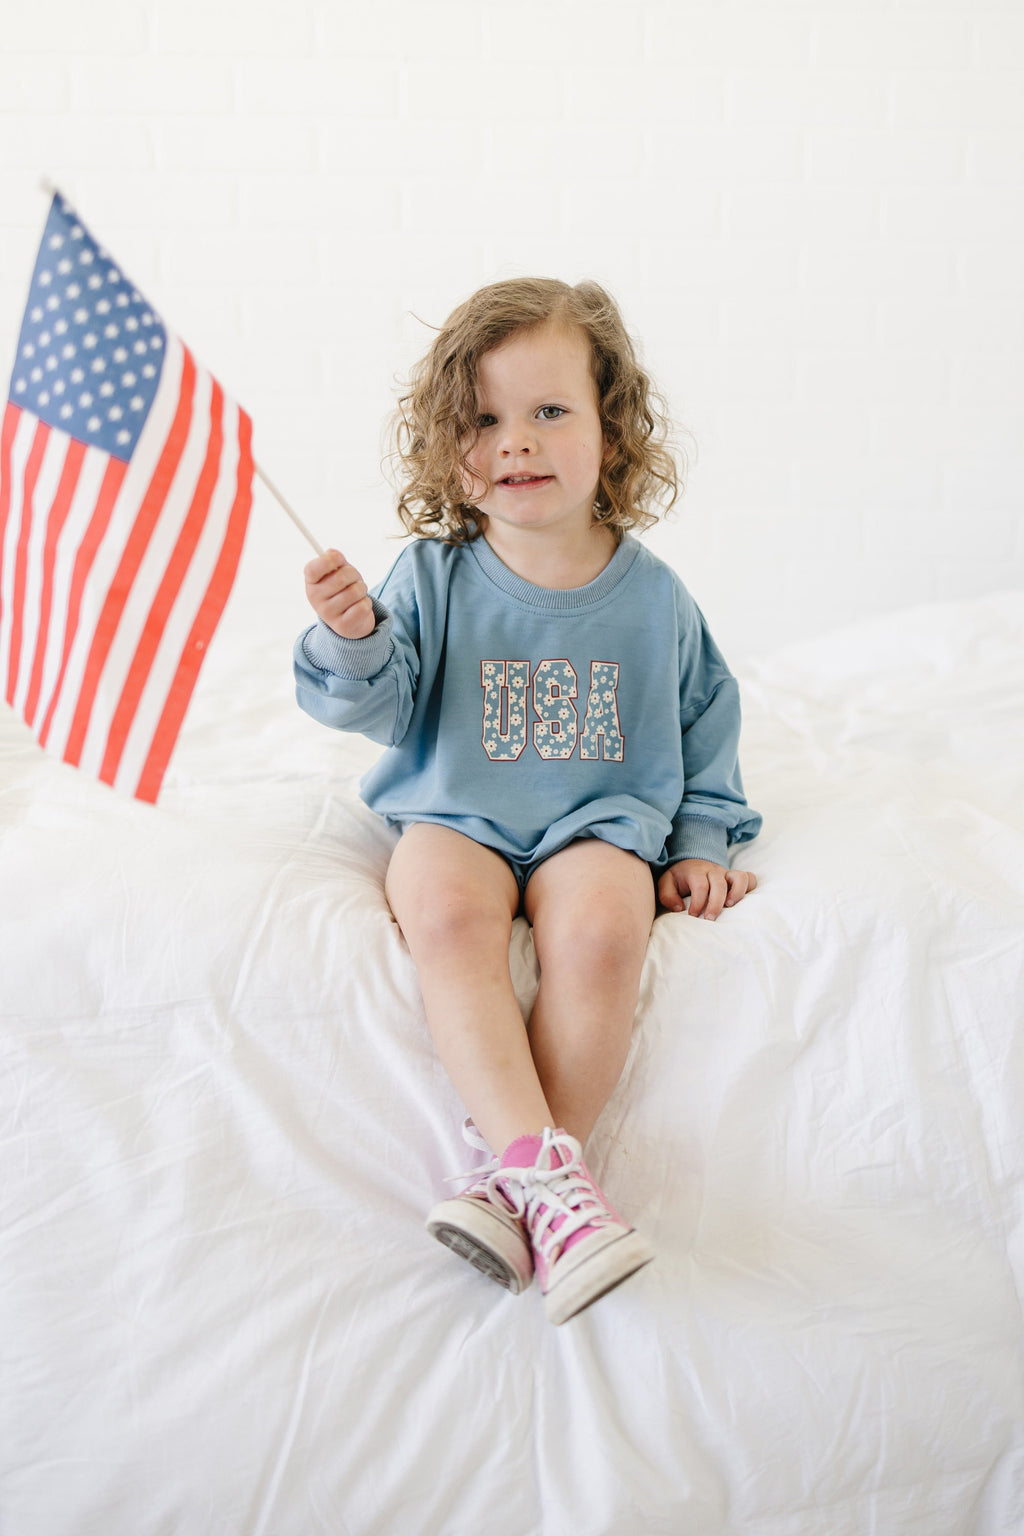 USA Daisy Graphic Oversized Bamboo Sweatshirt Romper - 4th of July Baby Girl Sweatshirt Bubble Romper - Toddler - Red White Blue Flag Shirt